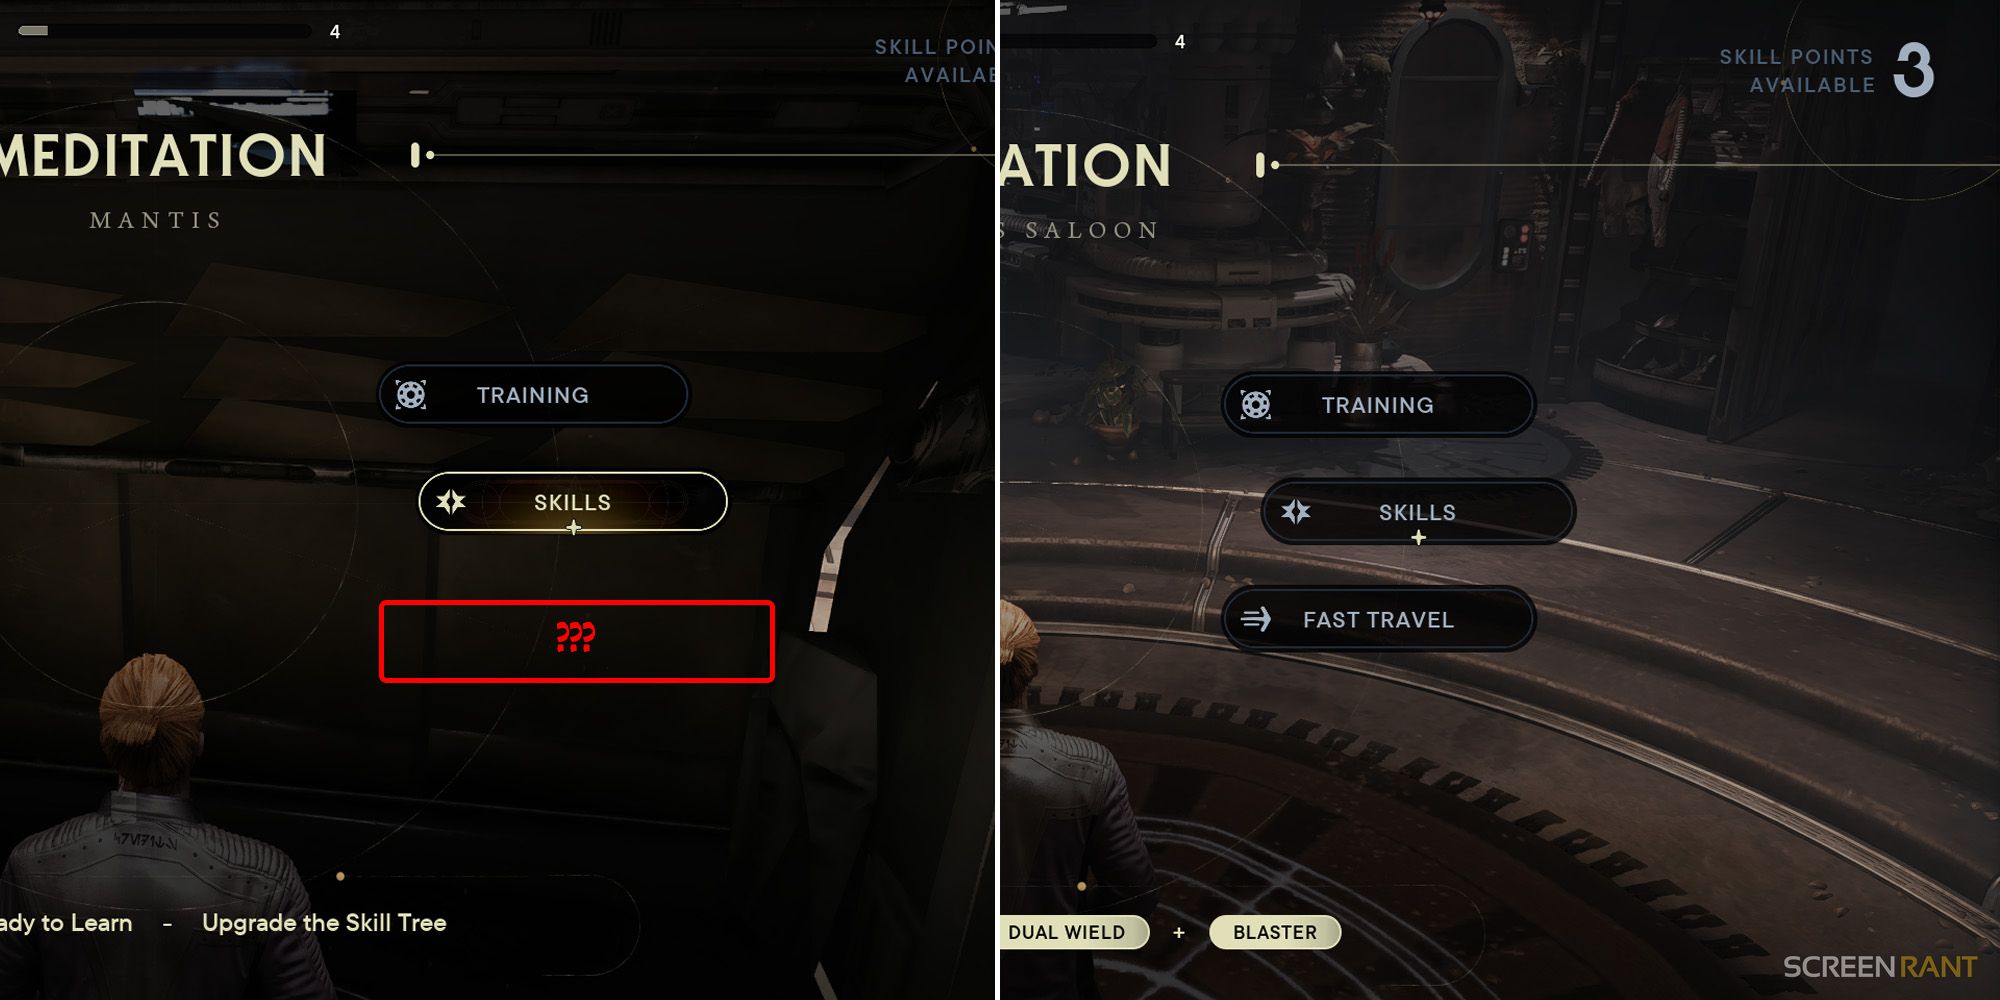 2 screenshots of star wars jedi survivor left: missing fast travel option from mantis, right: fast travel option avaialble